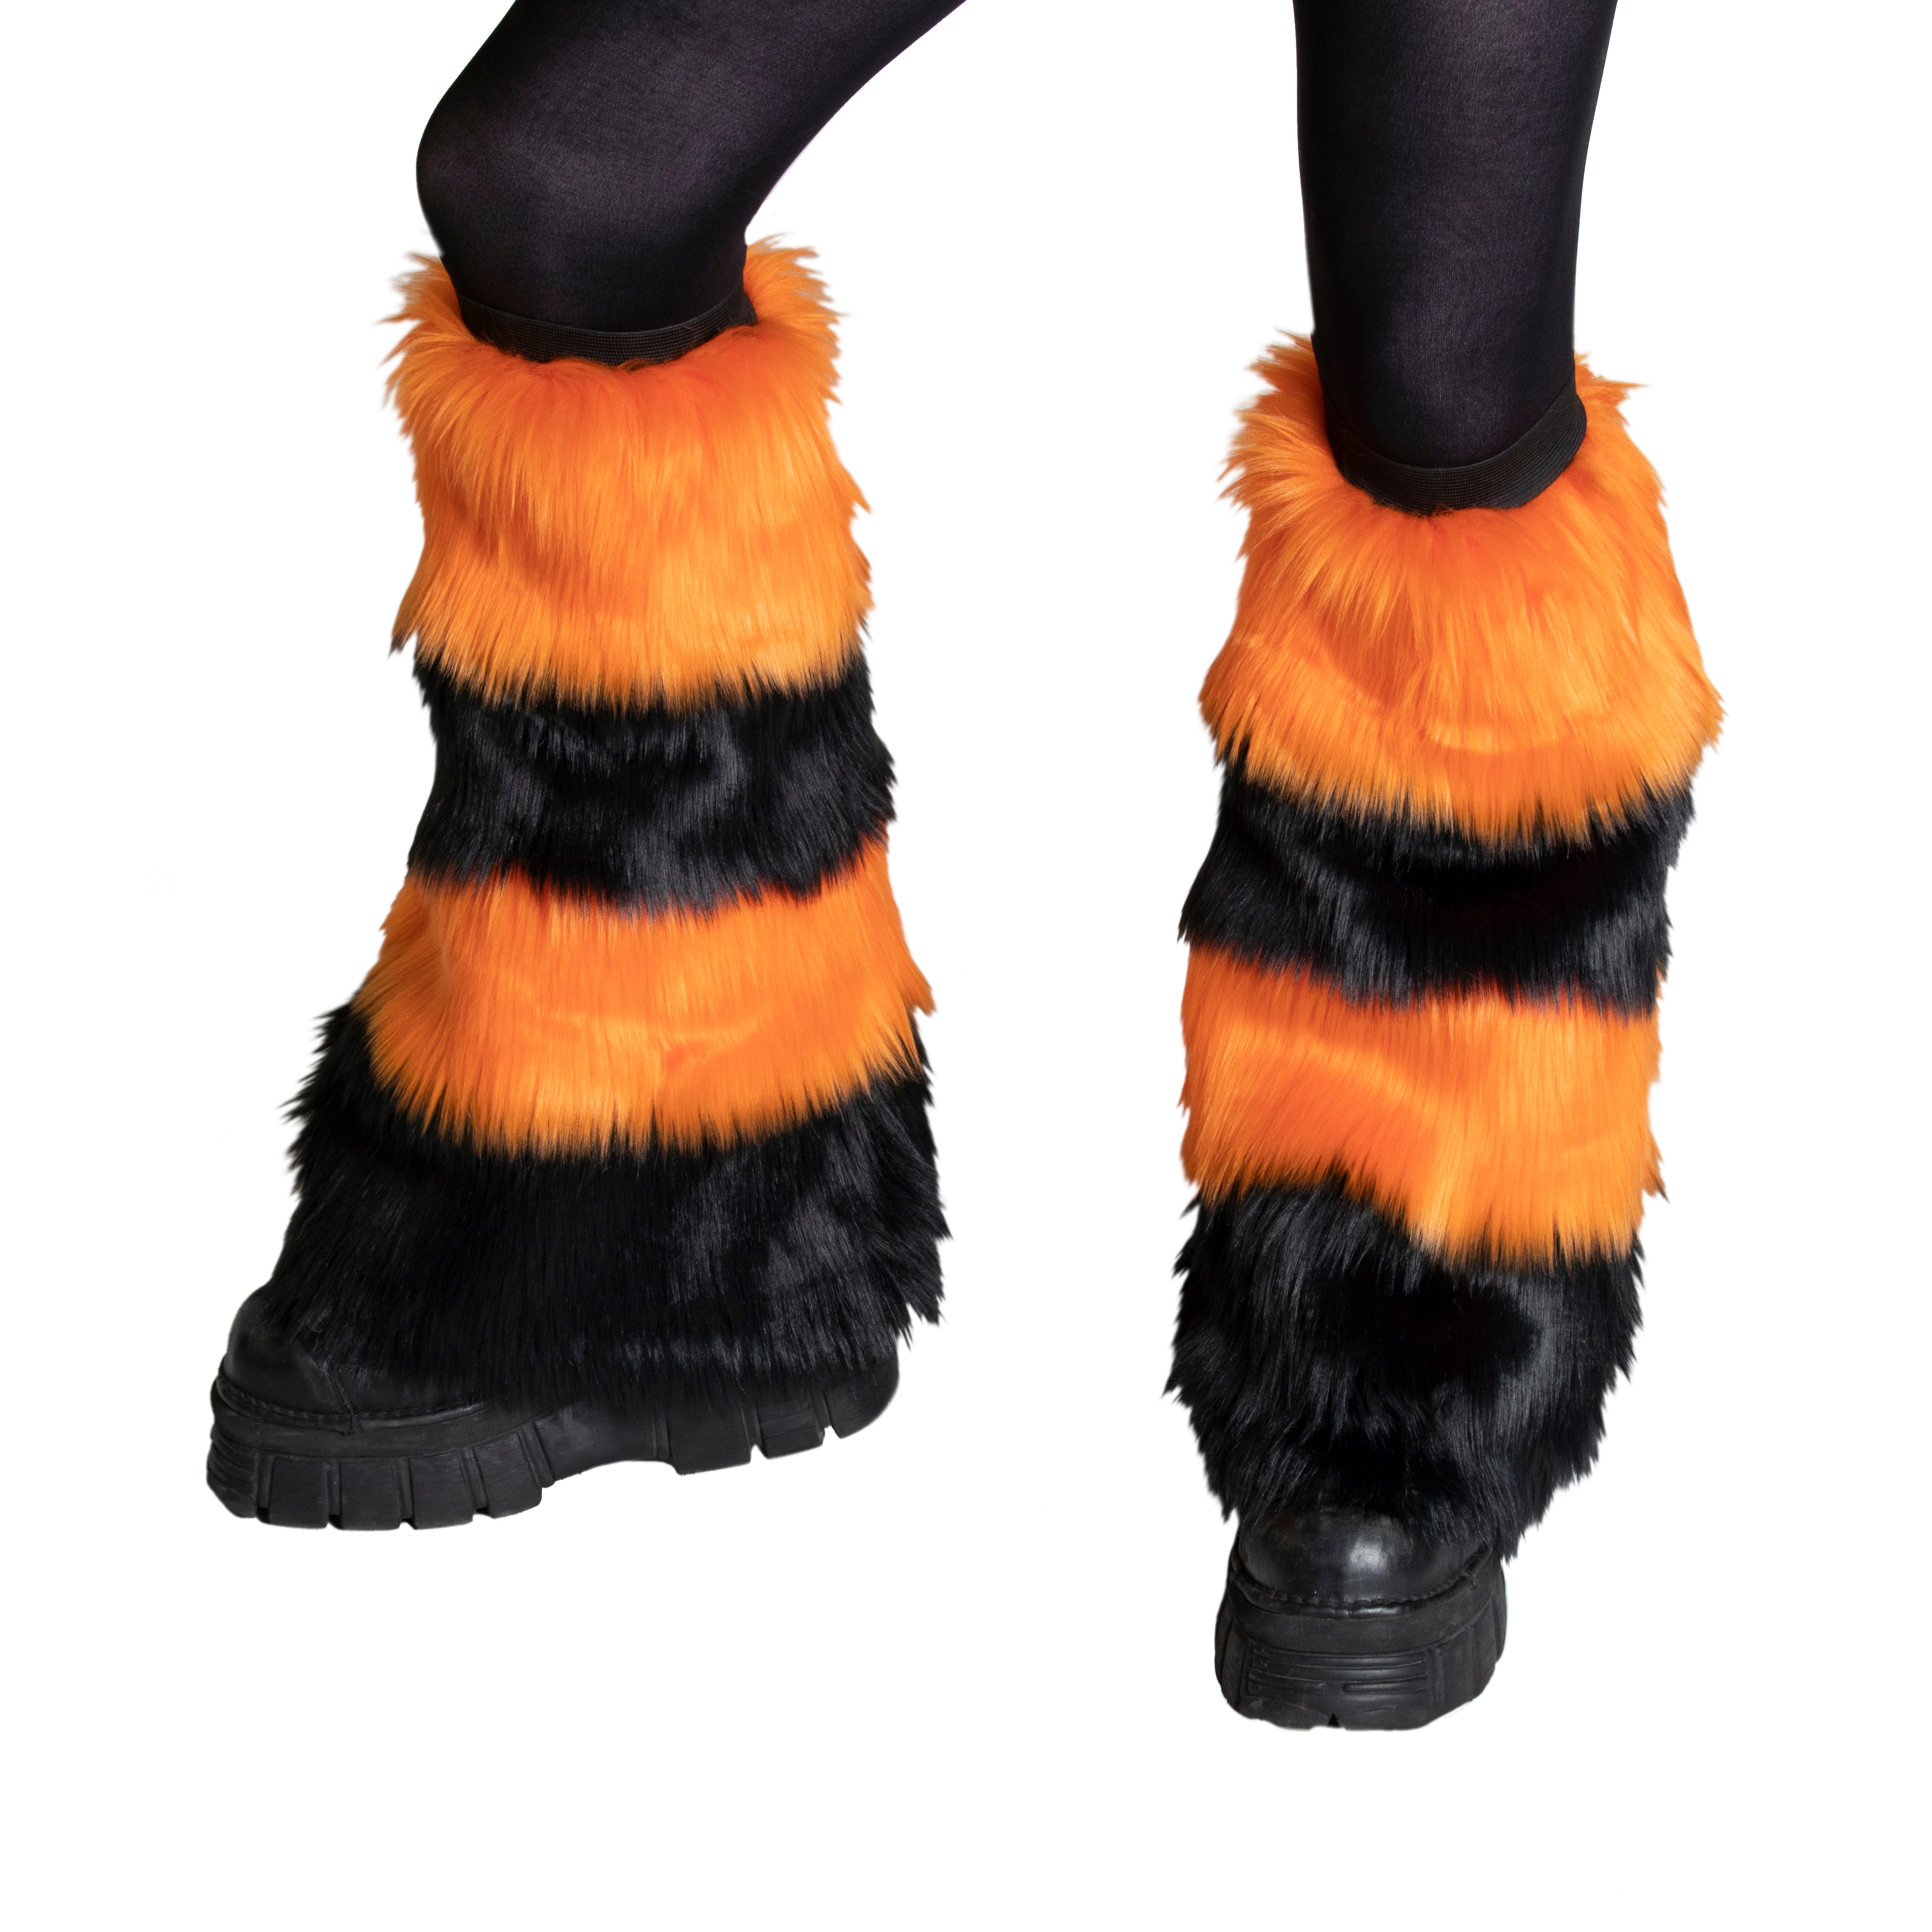 orange Pawstar fluffy stripey dance rave leg warmer. Great for halloween costume and furry cosplay.